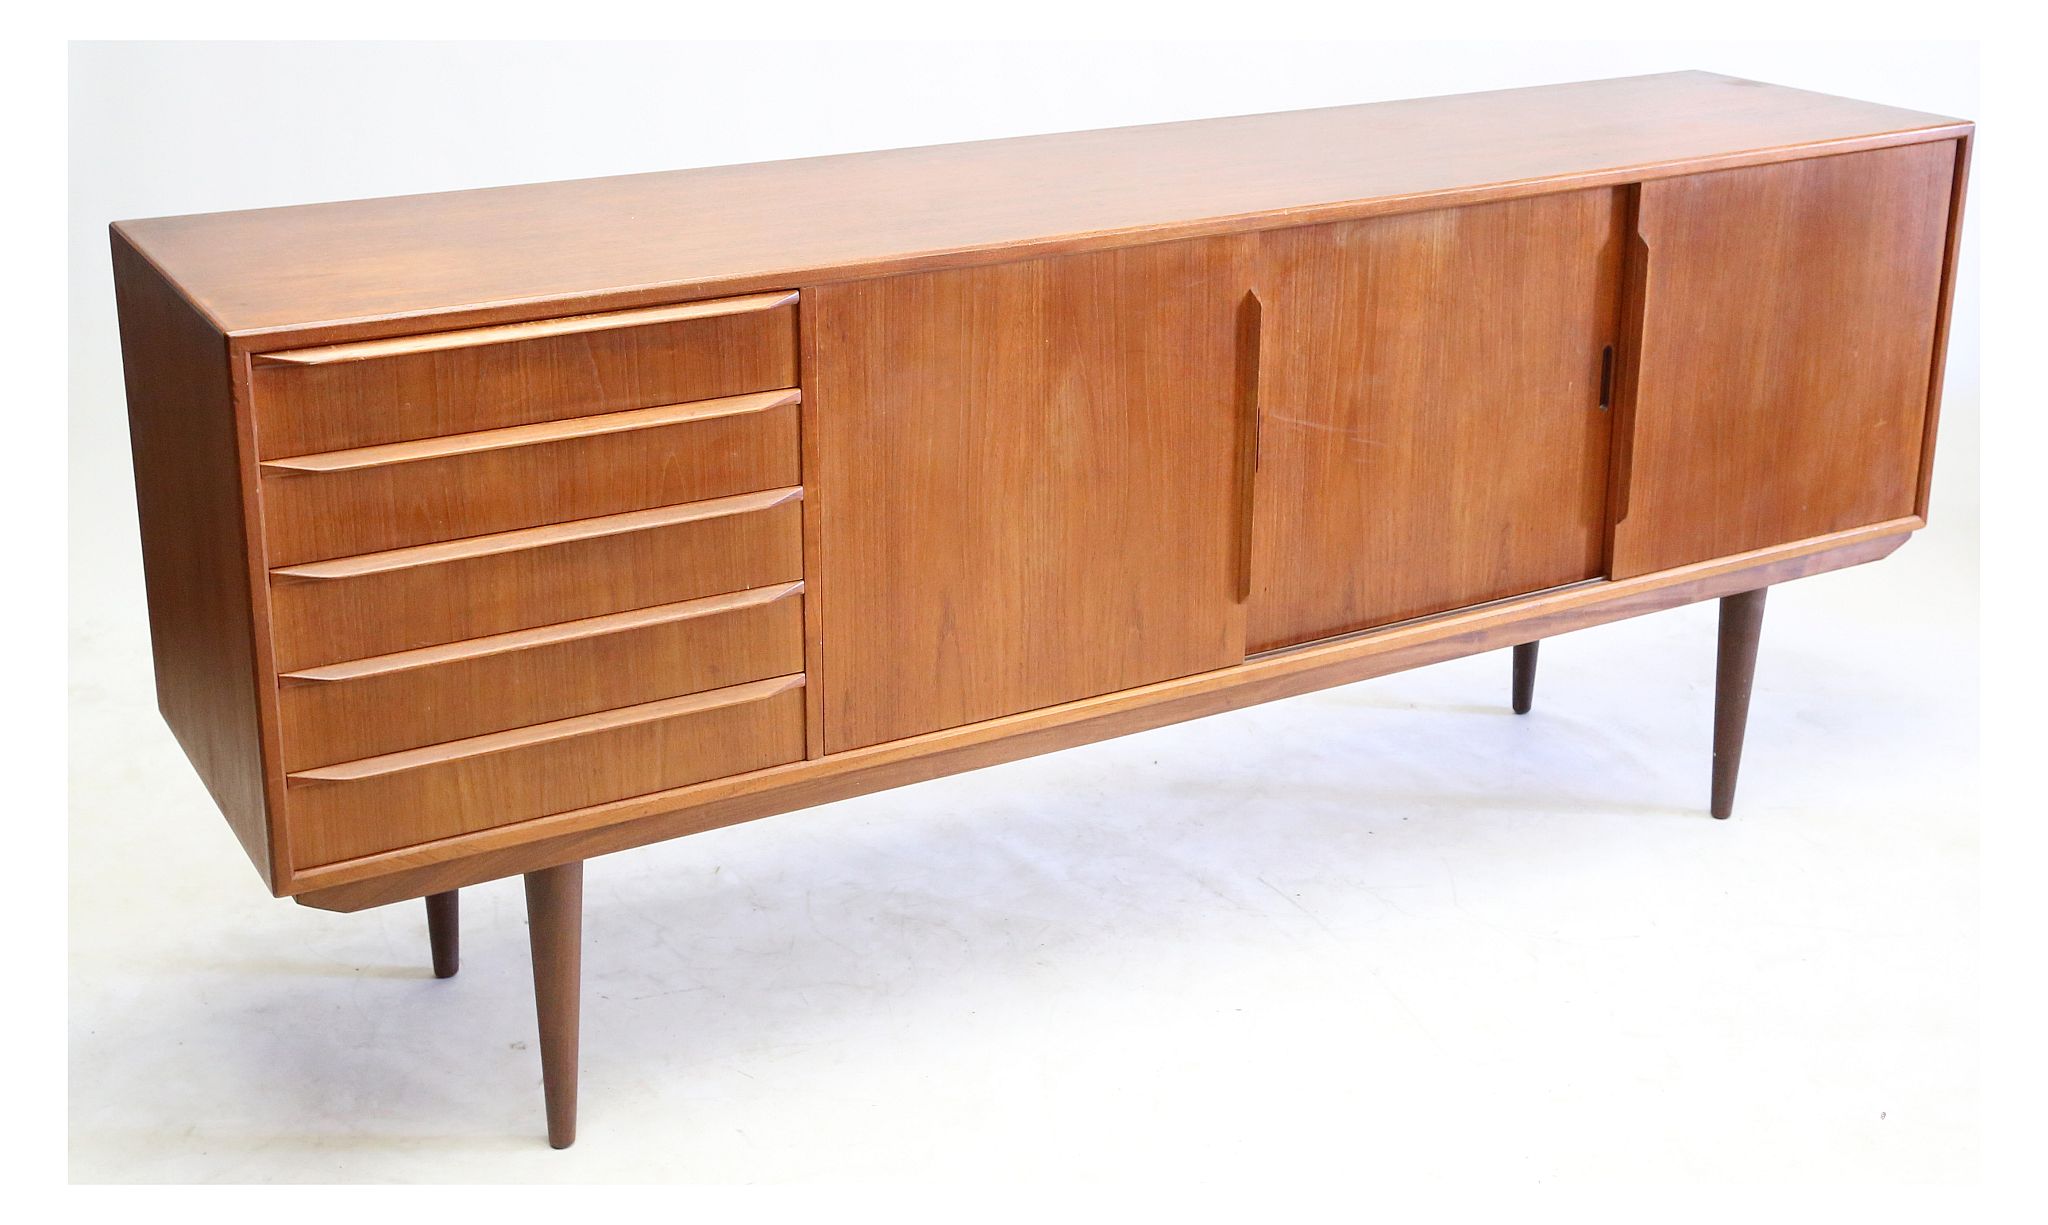 A DANISH 1960s TEAK SIDEBOARD, attributed to Svend